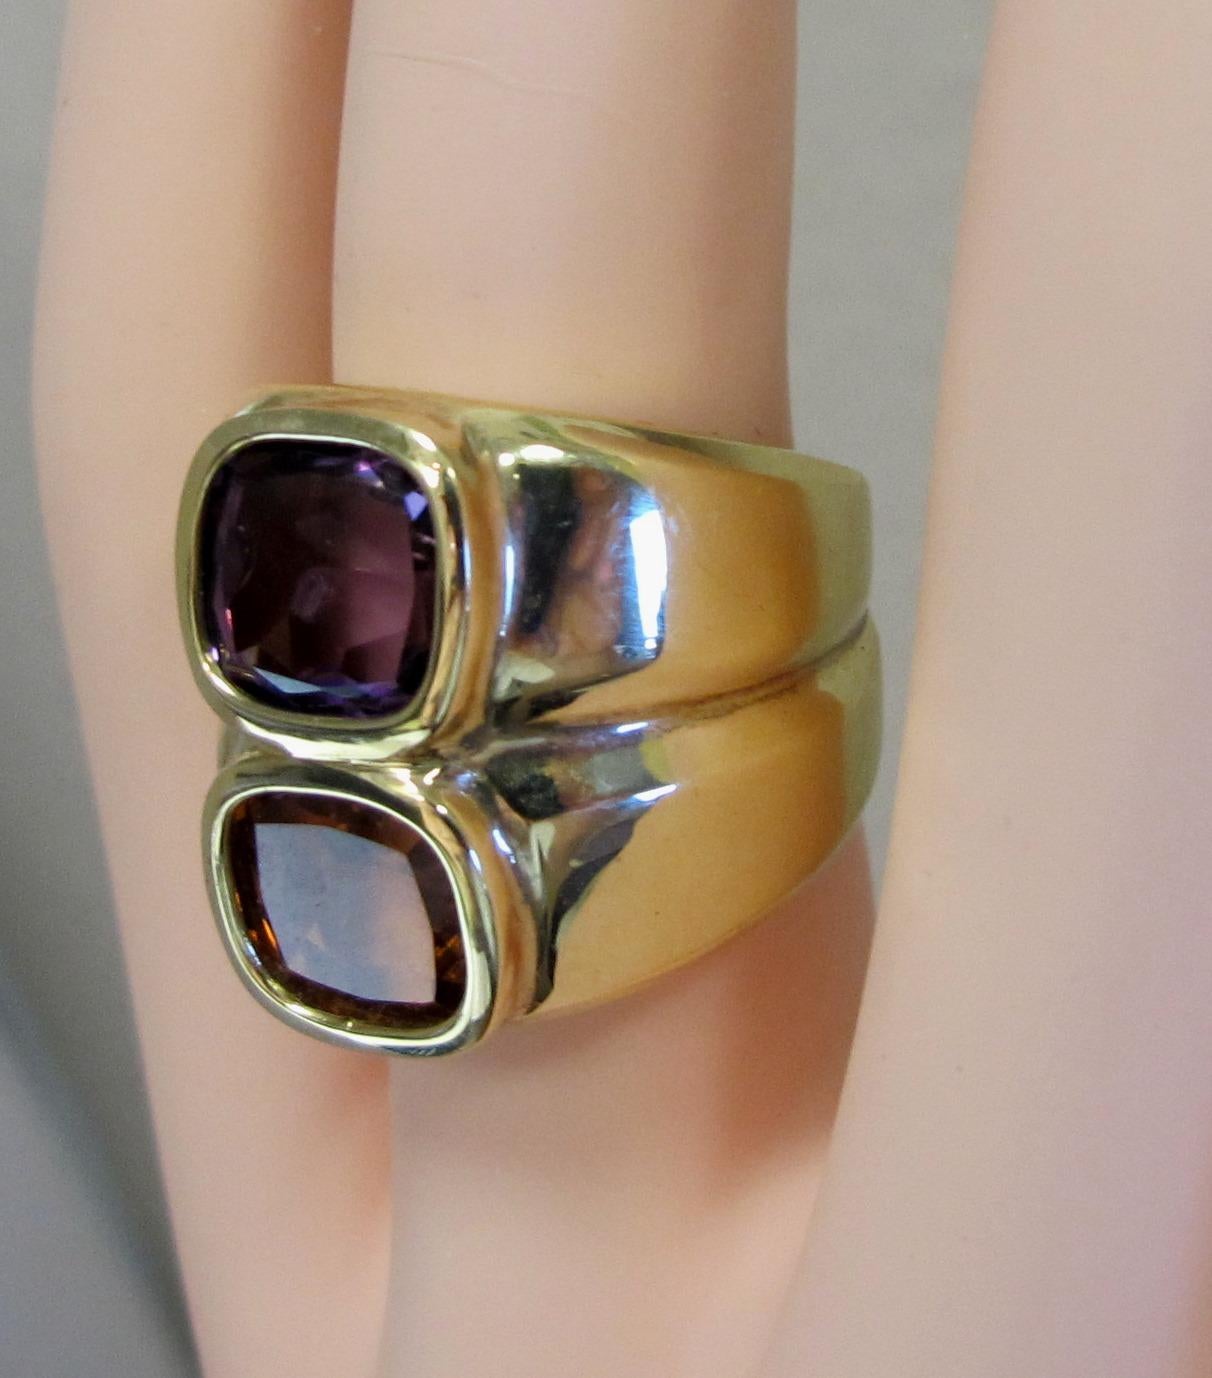 14 Karat Yellow Gold Ring with Center Stones of Amethyst and Topaz For Sale 2